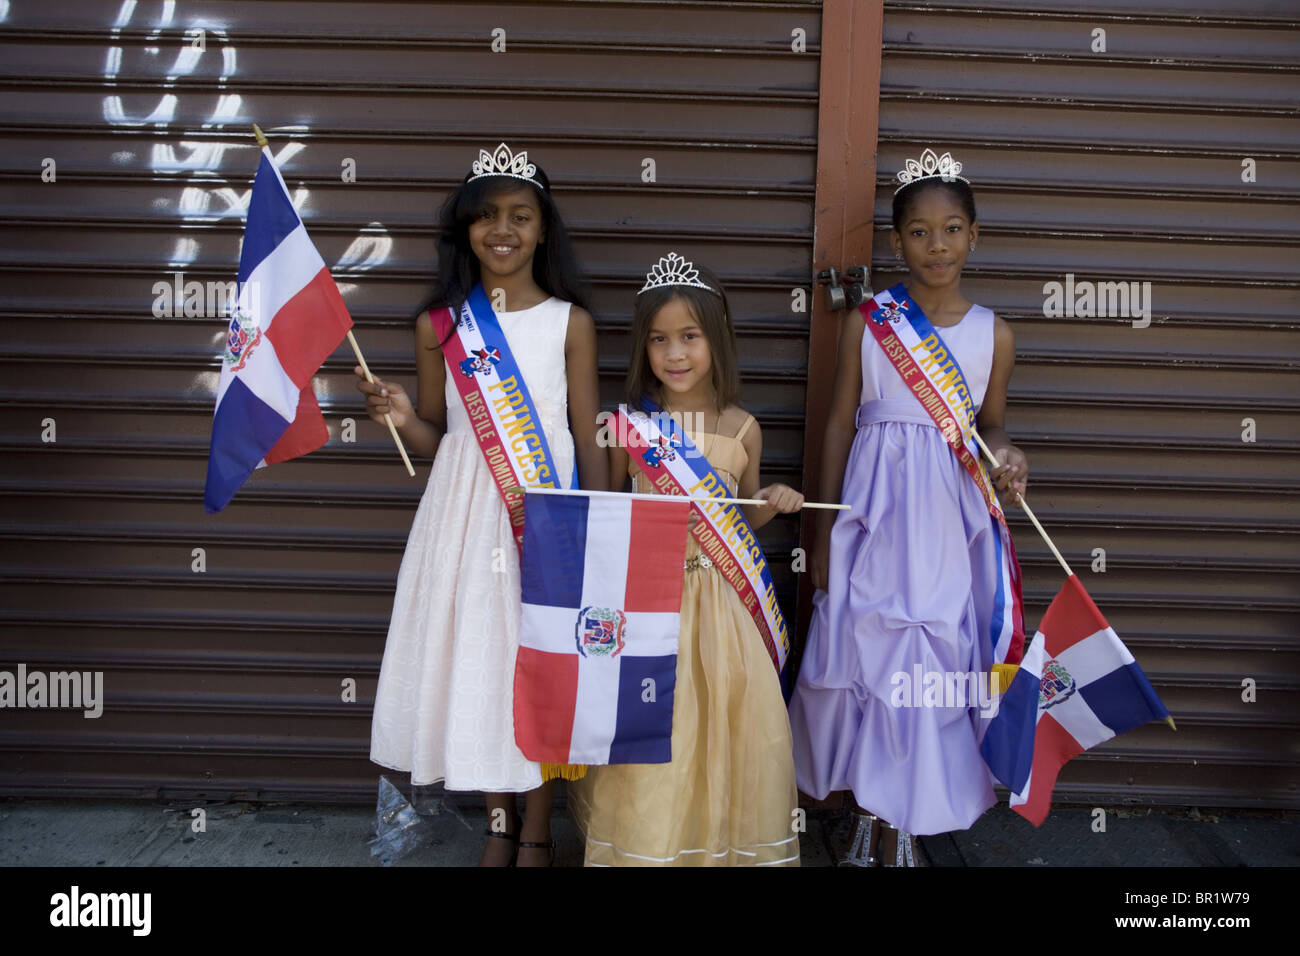 Official princesses at the 2010 Dominican Parade in Brooklyn, New York Stock Photo